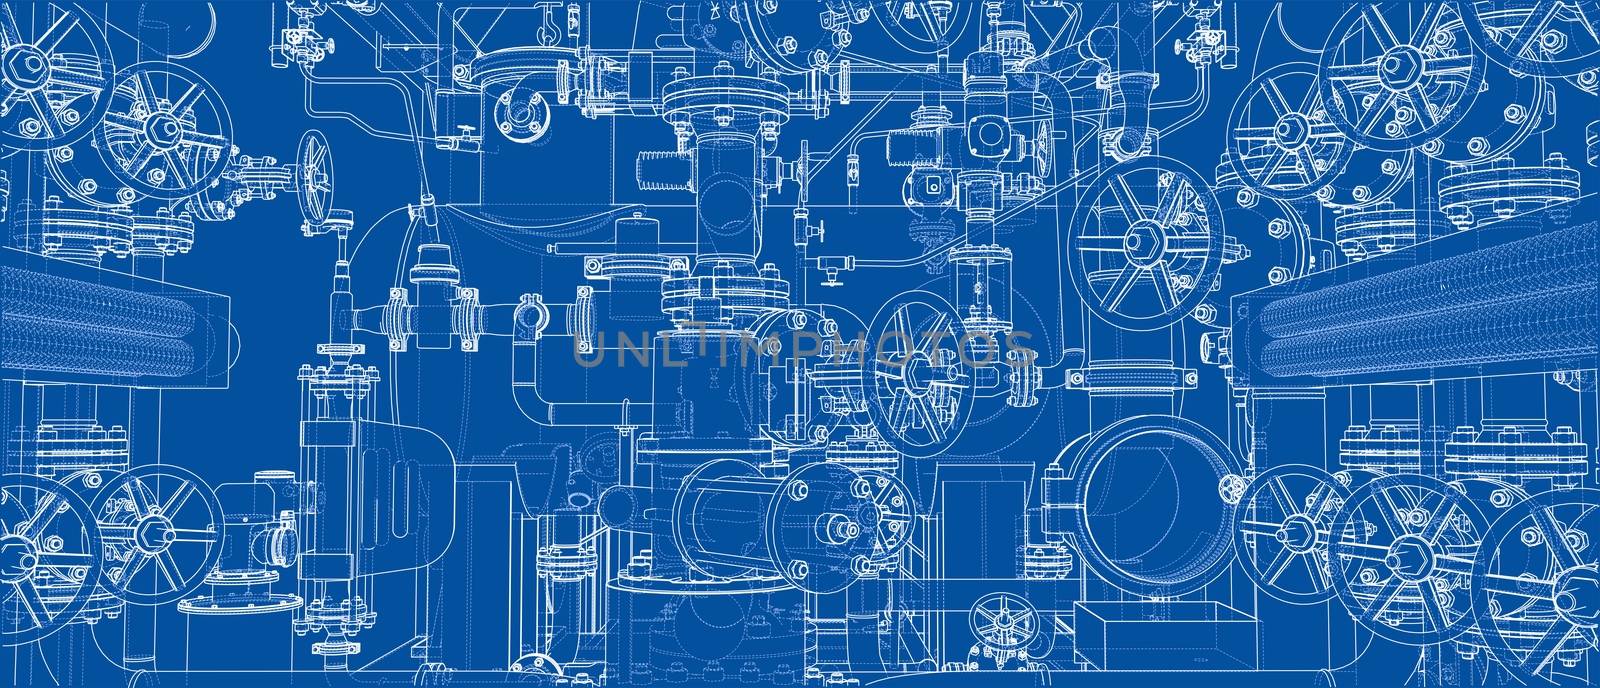 Sketch of industrial equipment. 3d illustration by cherezoff